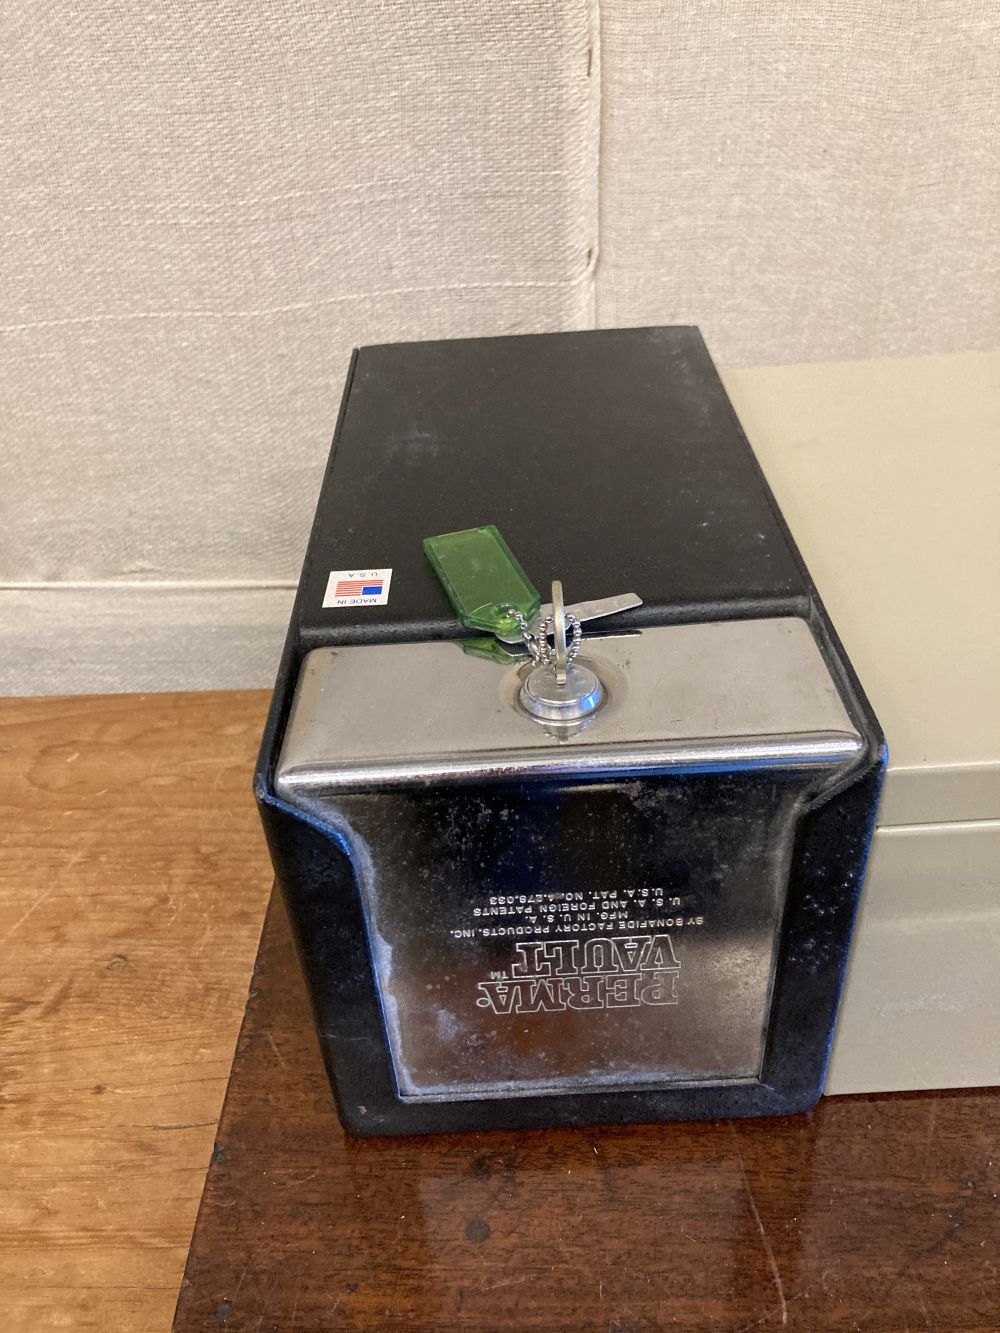 Four metal strongboxes and a document box